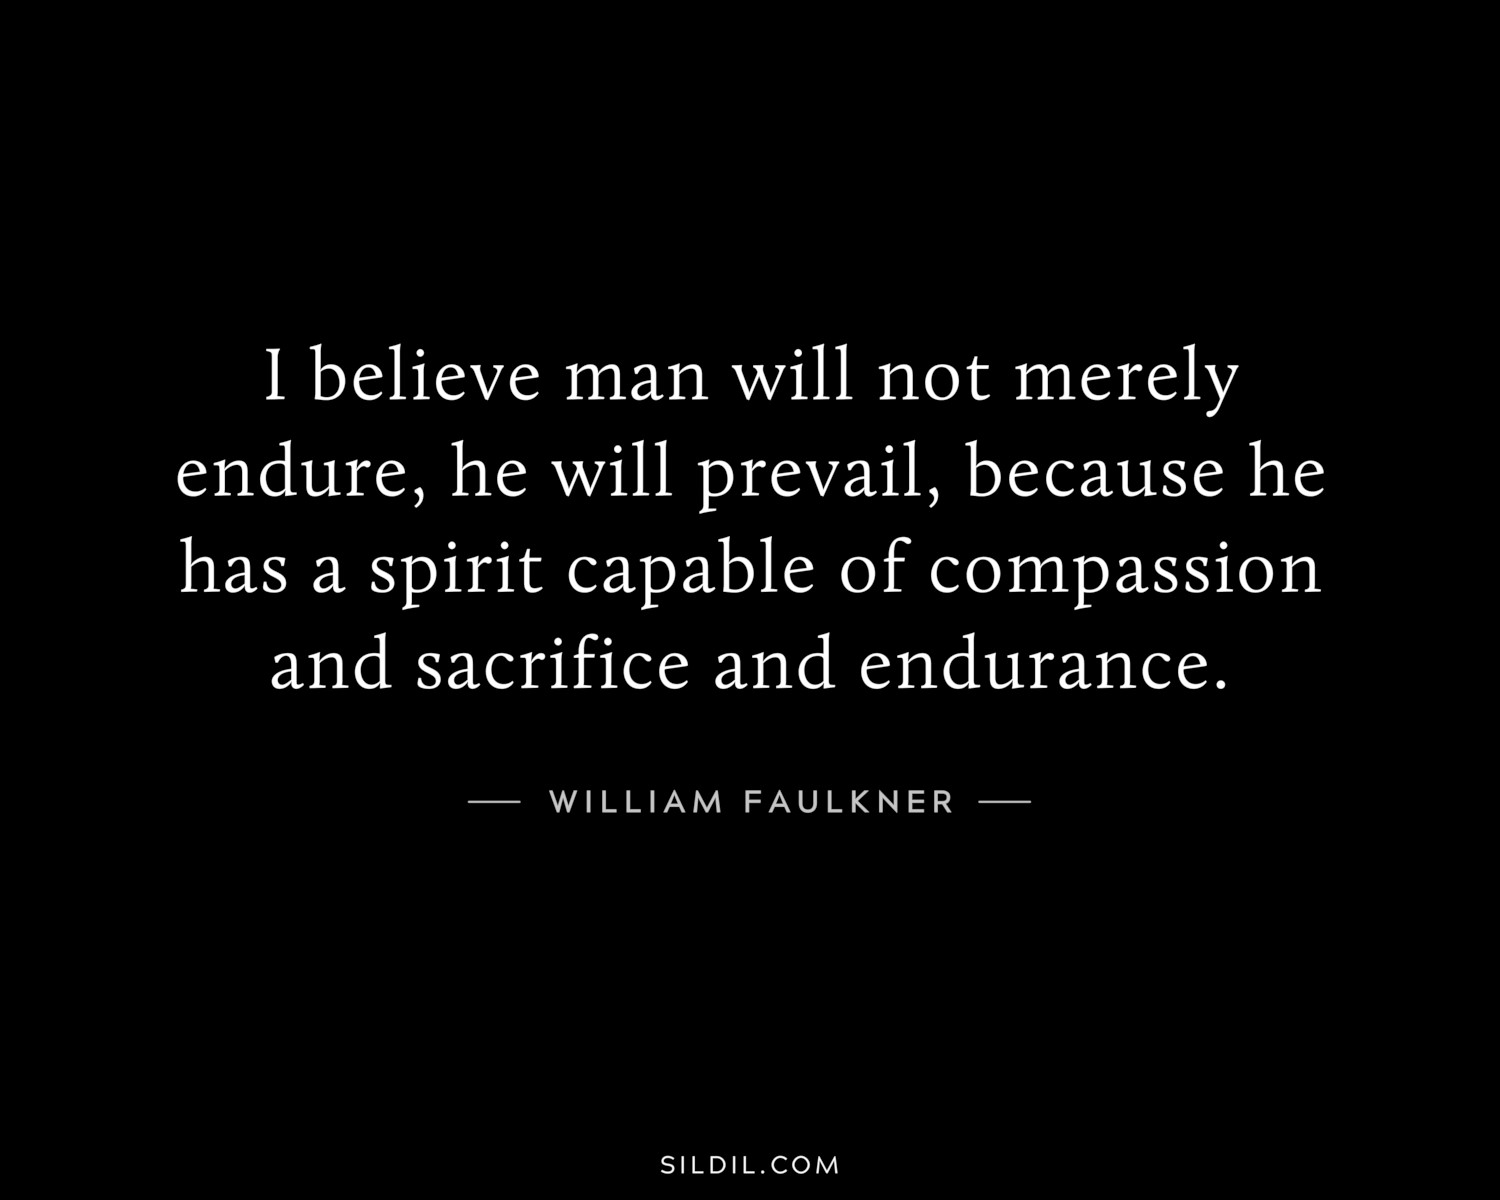 I believe man will not merely endure, he will prevail, because he has a spirit capable of compassion and sacrifice and endurance.